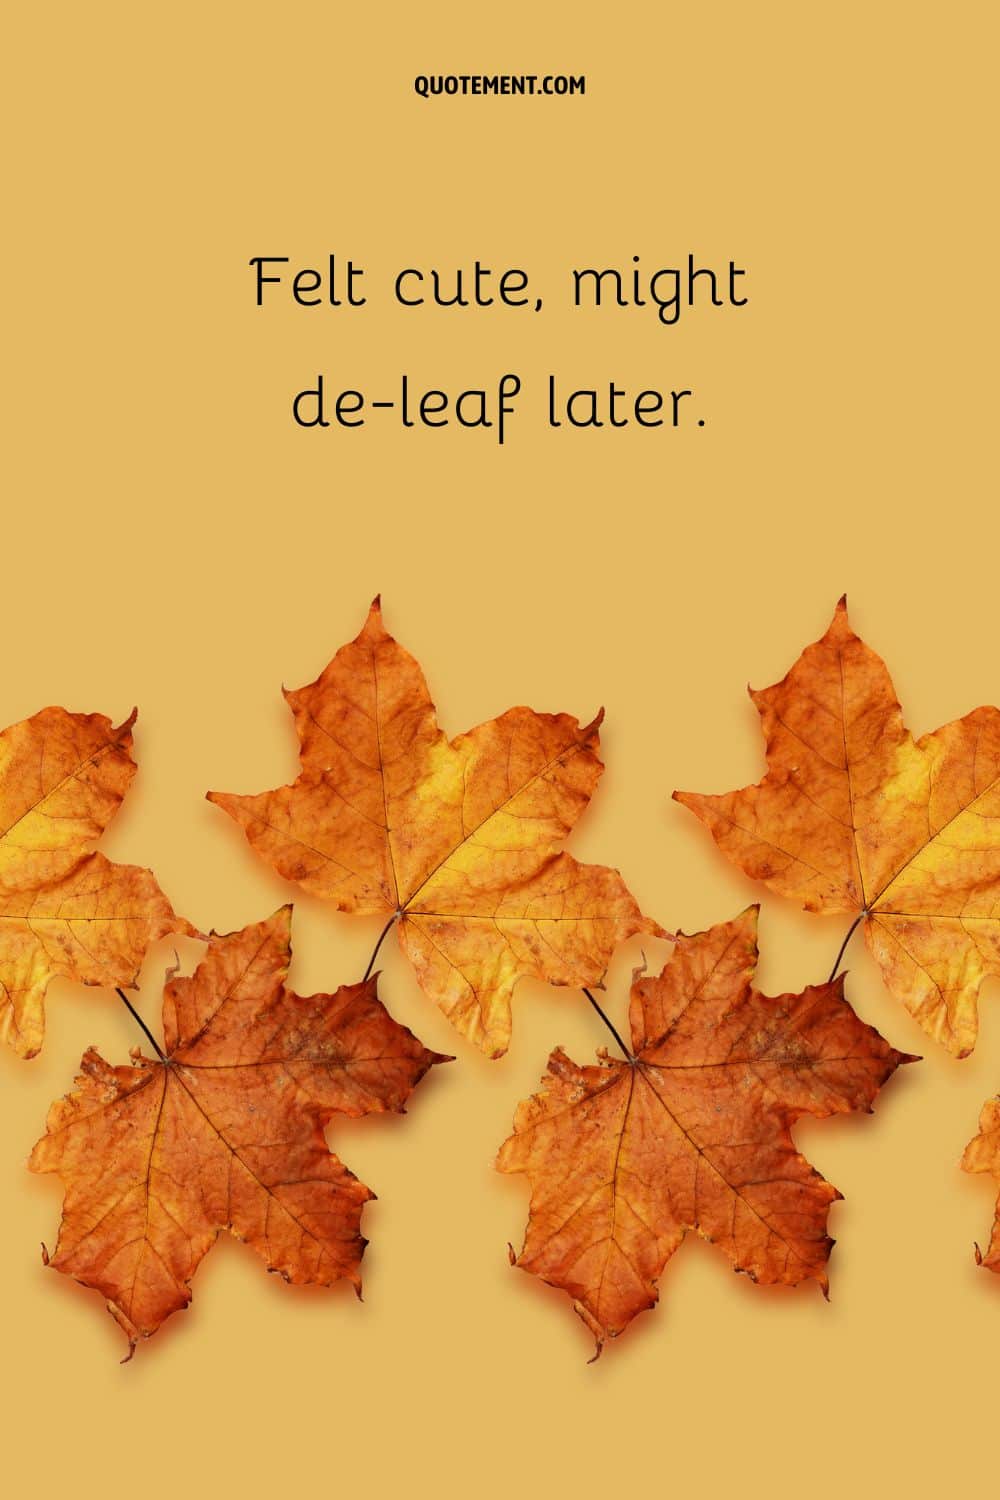 Image of fallen leaves representing the best fall Instagram caption.